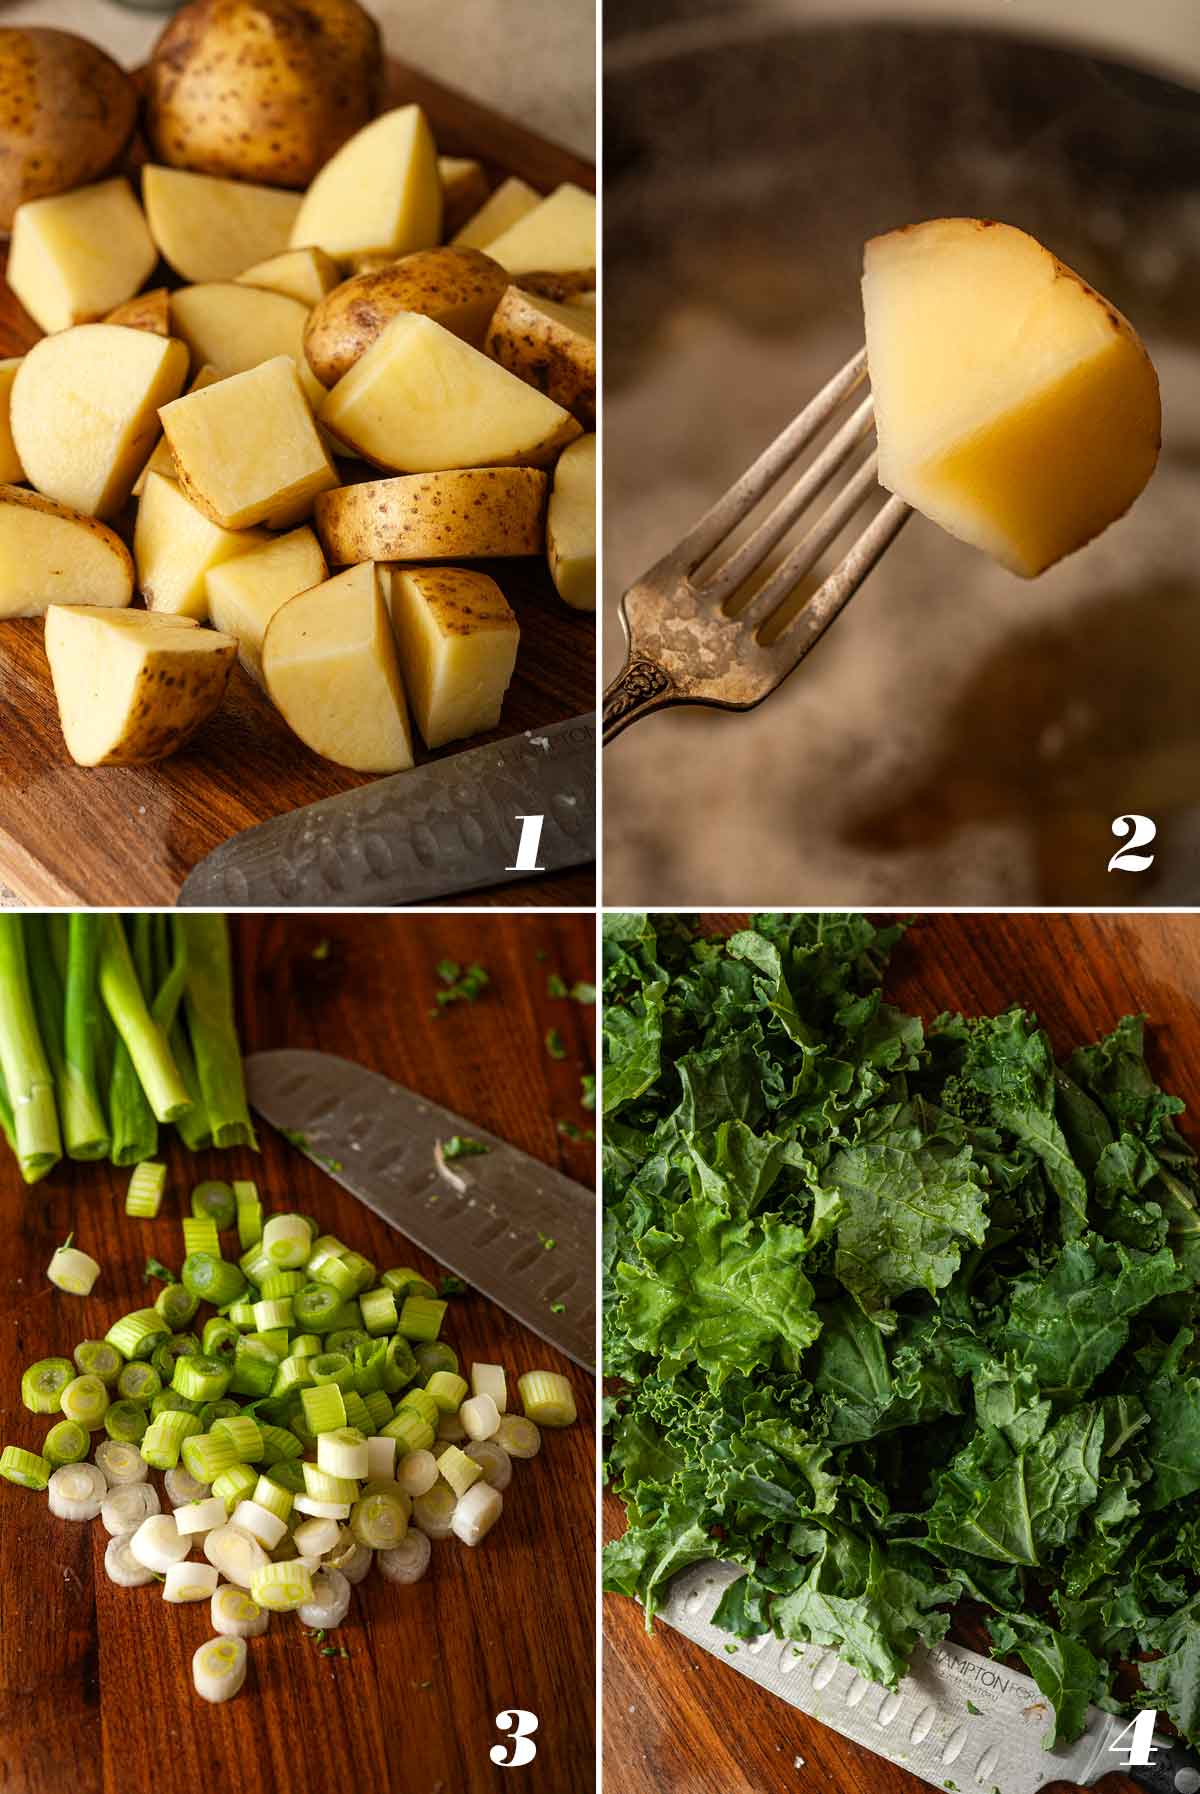 A collage of 4 numbered images showing how to prep potatoes, green onions and kale.